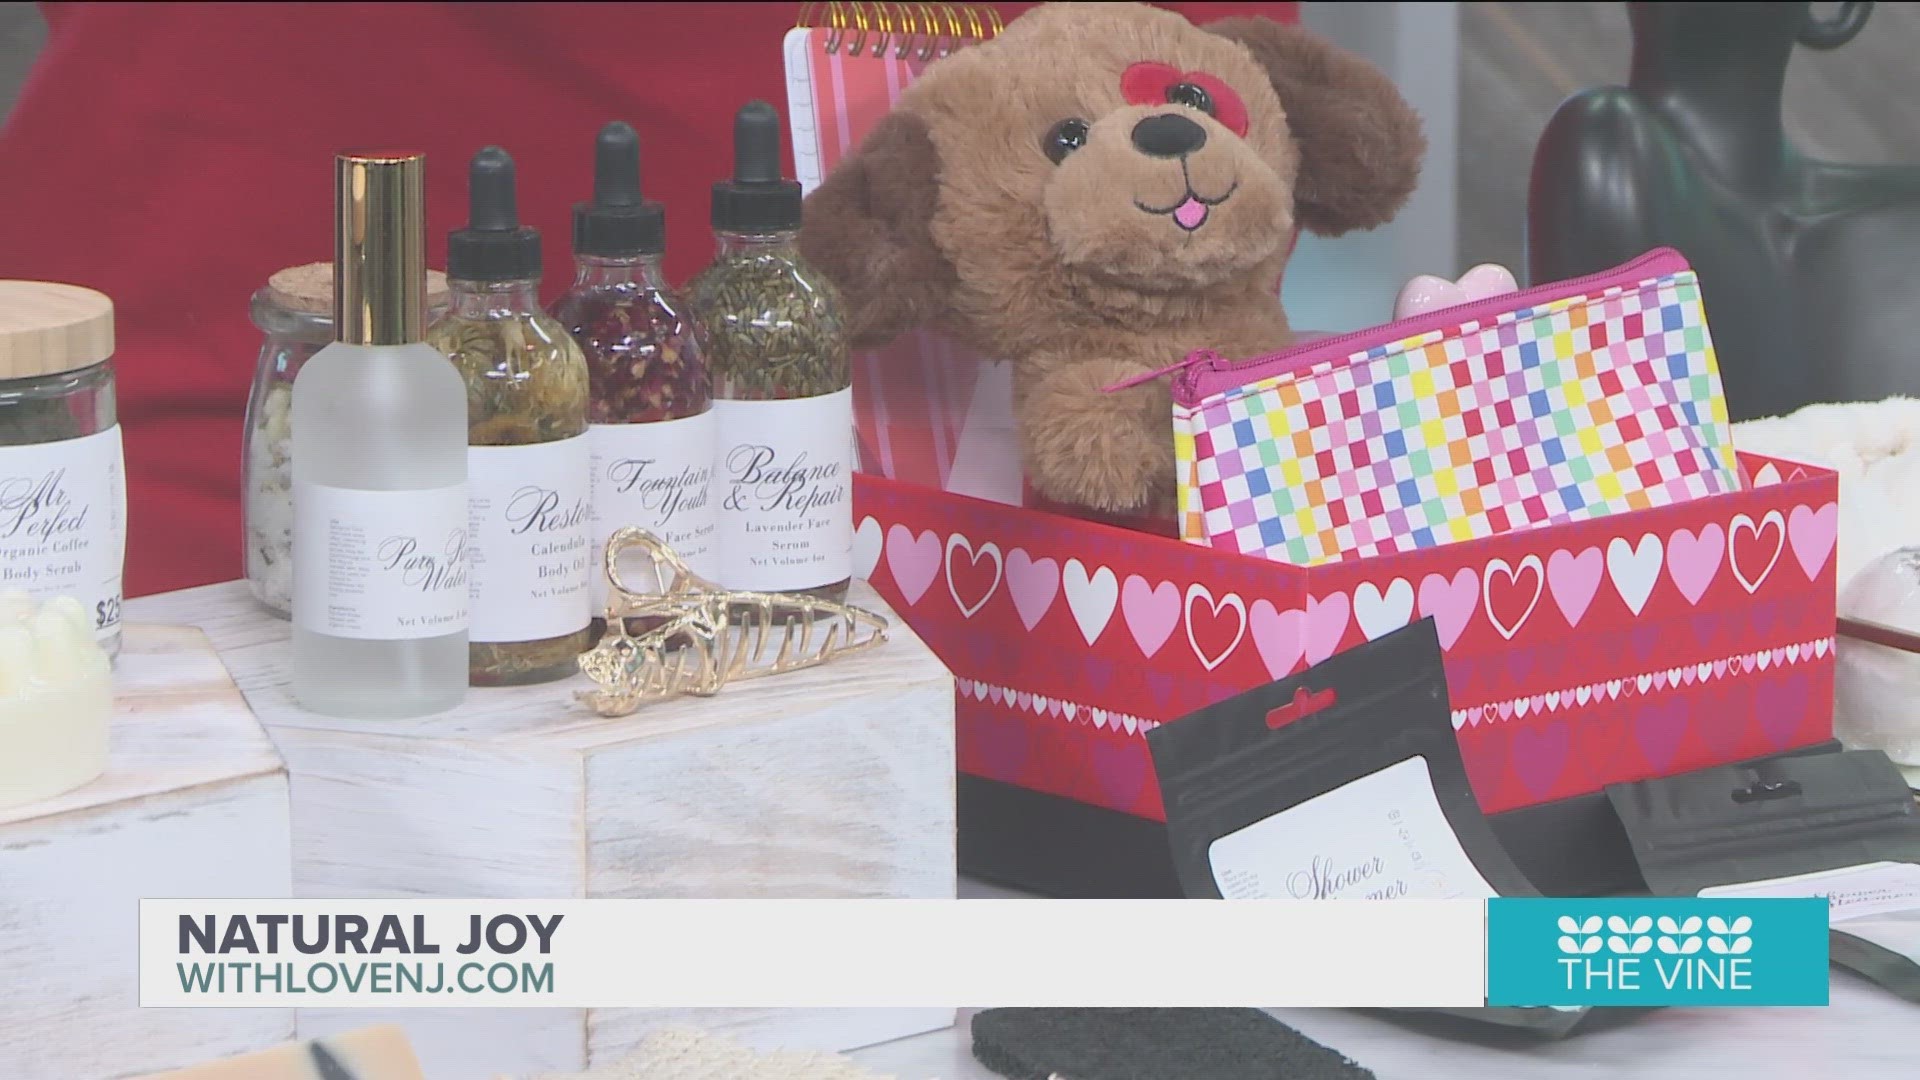 Natural Joy hops to be your one stop gift shop for Valentine's Day. Owner, Janae Wilson shares more about their Sweetheart sale and their 1-year anniversary.